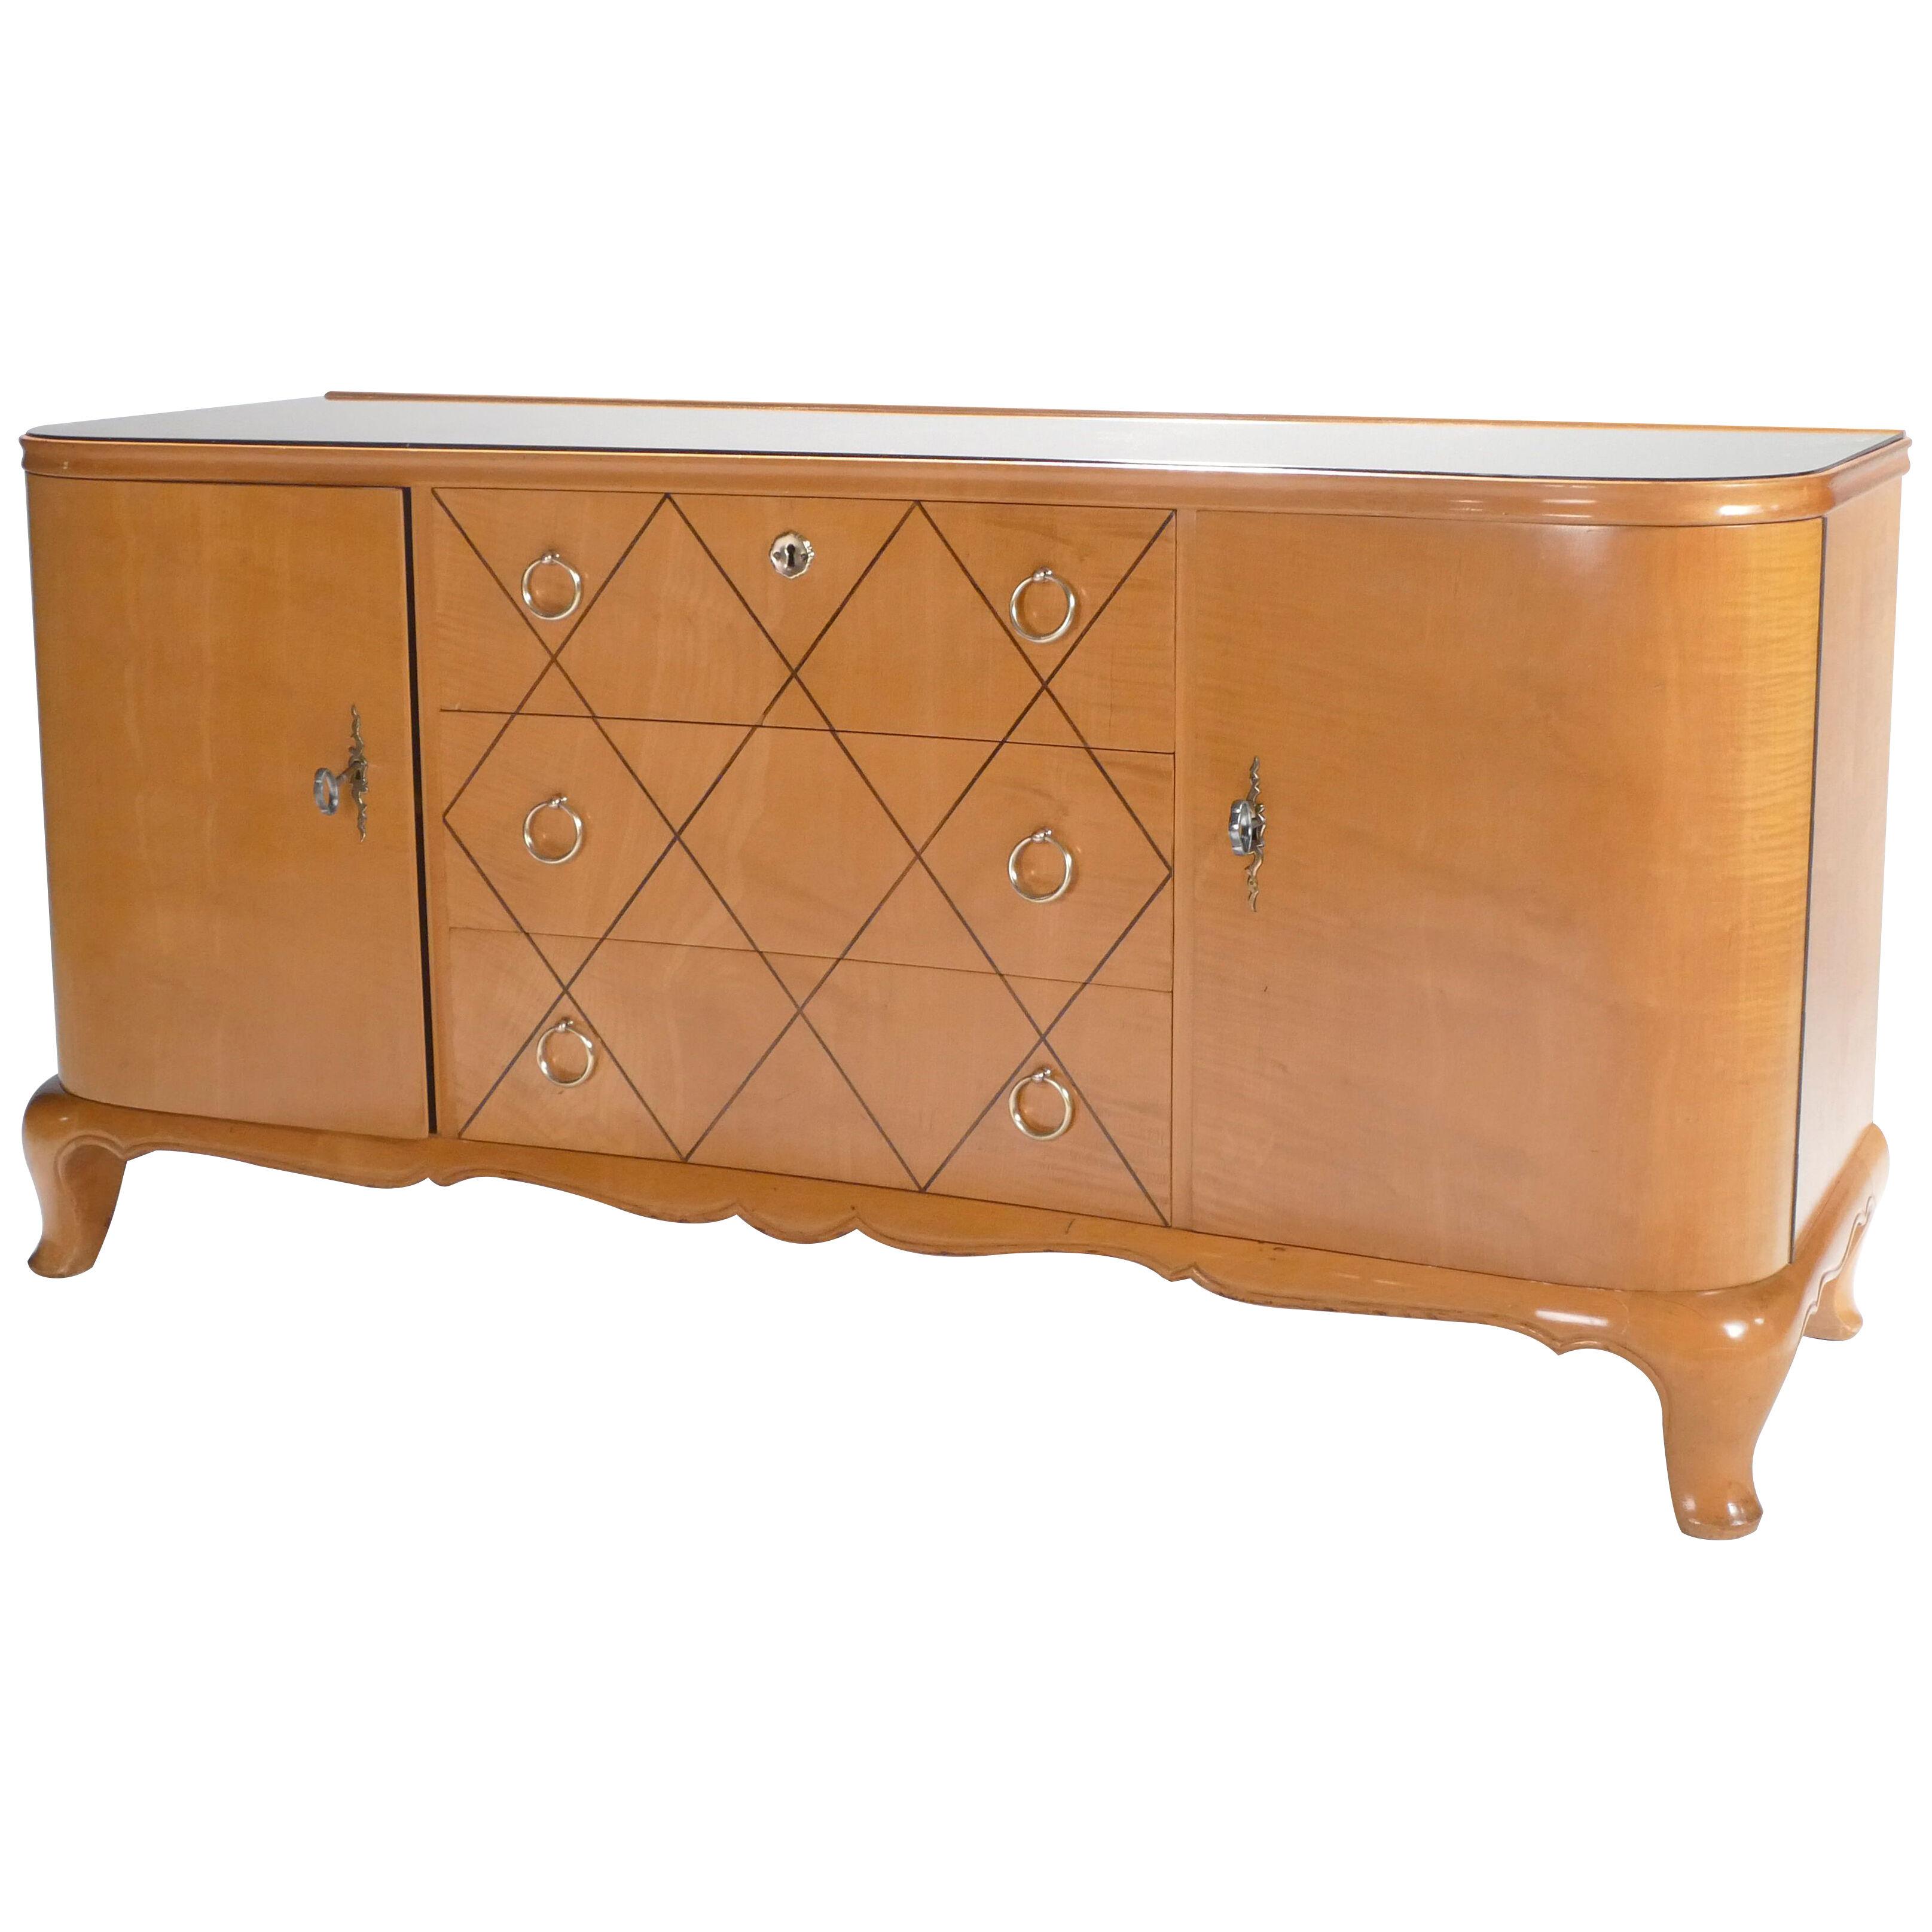 French René Prou Sycamore Mirrored Brass Sideboard Commode, 1950s